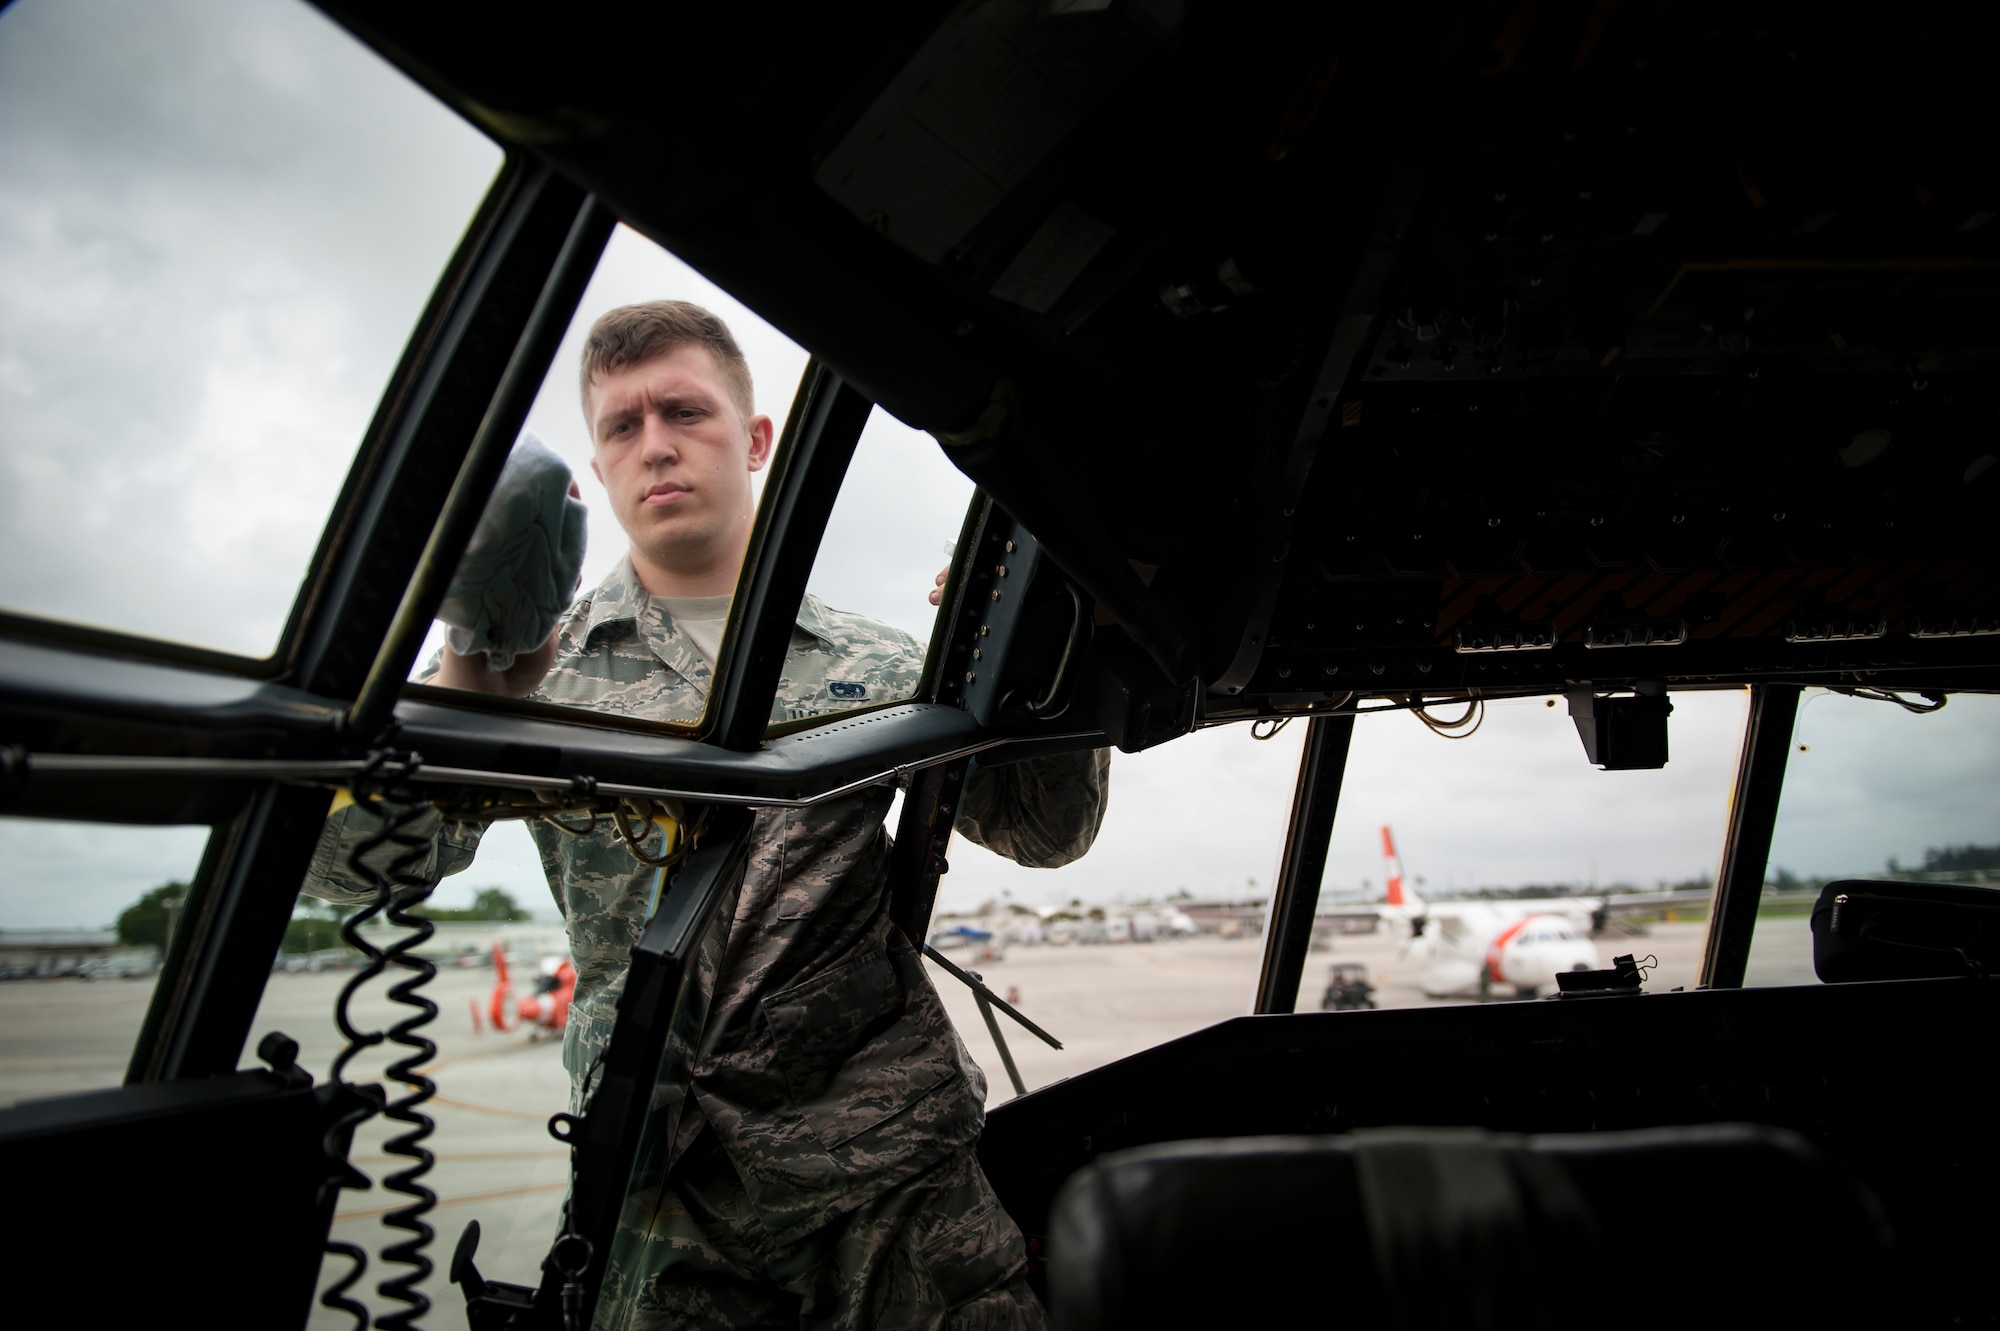 Air Force Reserve Senior Airman  Spencer Kalapp, crew chief, 720th Aircraft Maintenance Squadron from Patrick Air Force Base in Cocoa Beach, Florida, cleans the windshields of an HC-130- P/N “King” on May 25th, 2018, at Miami, before a practice run for the 2nd annual Salute to American Heroes Air and Sea Show. This two-day event showcases military fighter jets and other aircraft and equipment from all branches of the United States military in observance of Memorial Day, honoring servicemembers who have made the ultimate sacrifice. (U.S. Air Force photo/Staff Sgt. Jared Trimarchi)